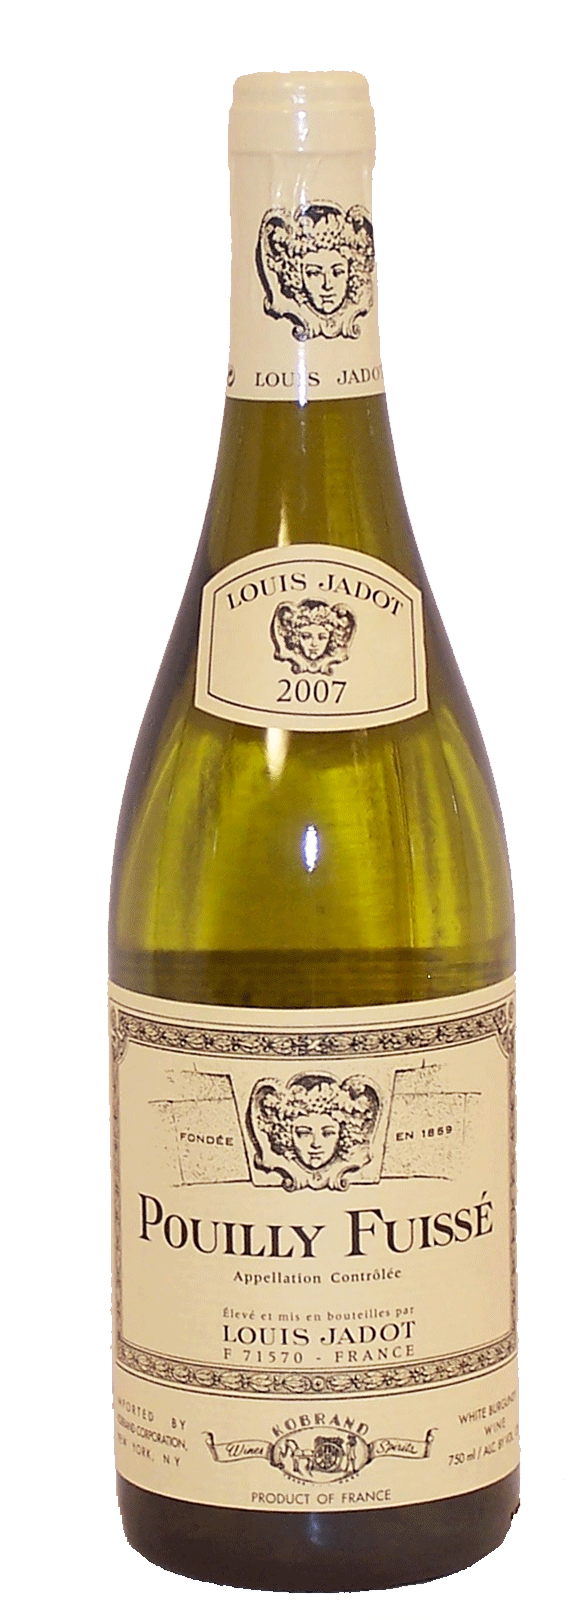 Louis Jadot  pouilly - fuisse, appellation controlee, white burgundy table wine, 13% alc./vol. Full-Size Picture